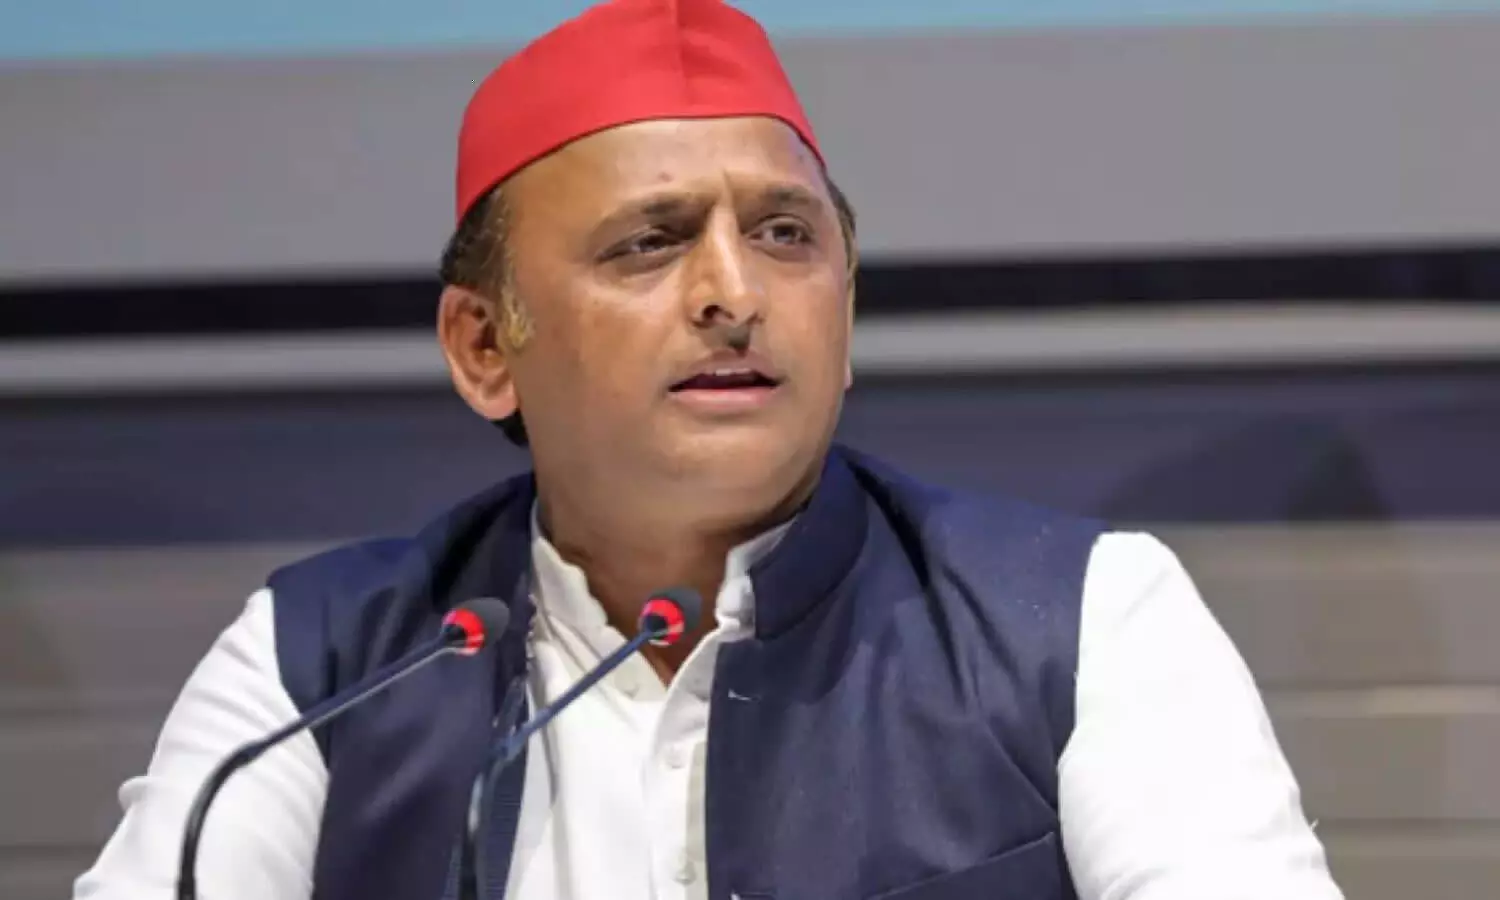 Targeting the BJP Akhilesh said that the people are upset due to the anti people policies